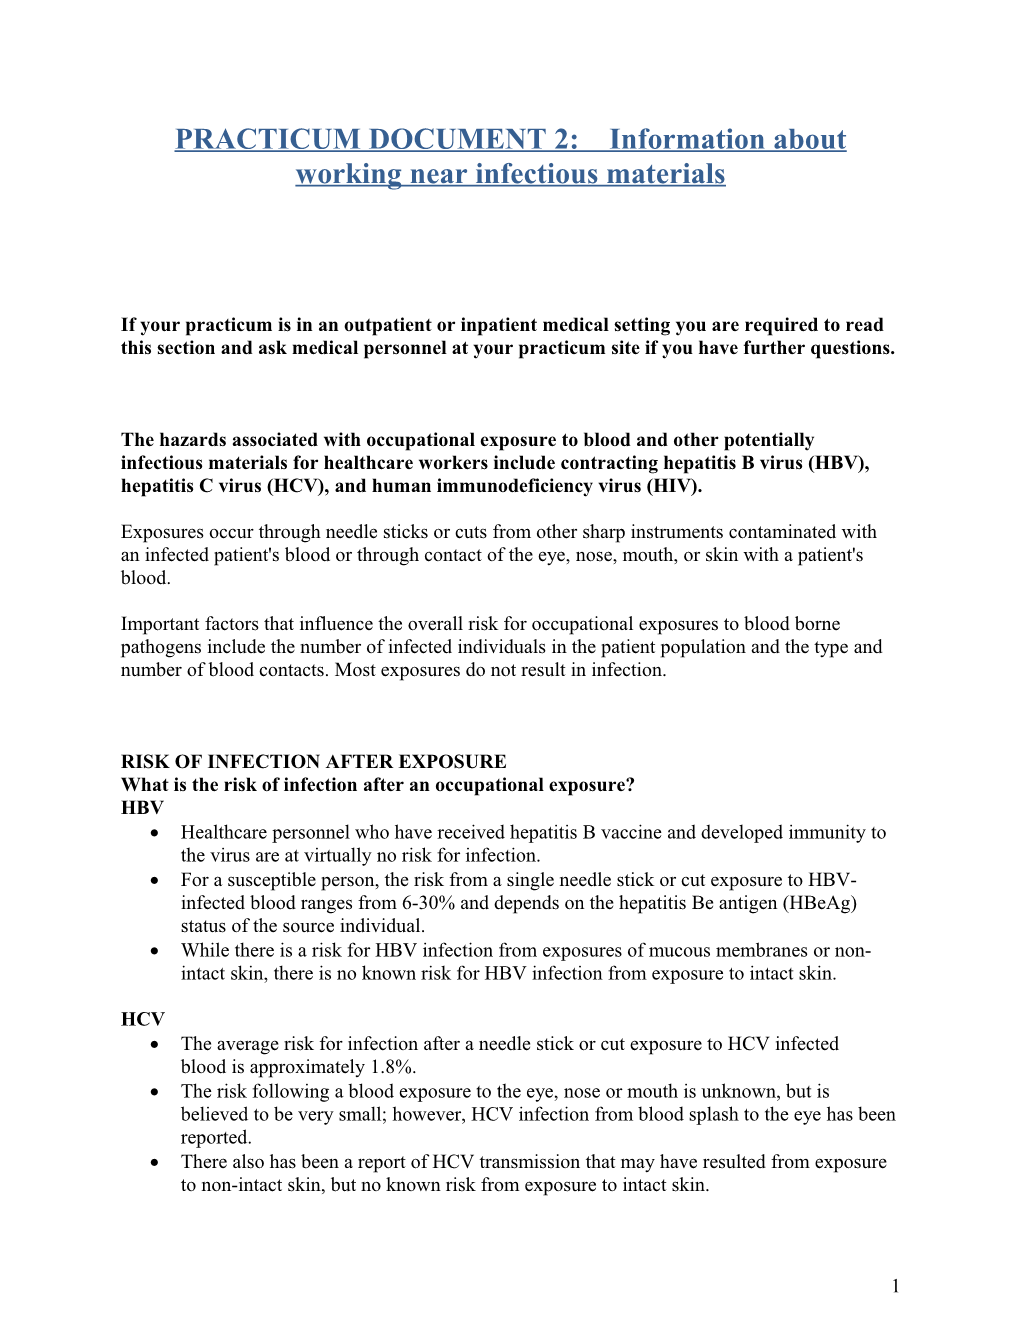 PRACTICUM DOCUMENT 2: Information About Working Near Infectious Materials